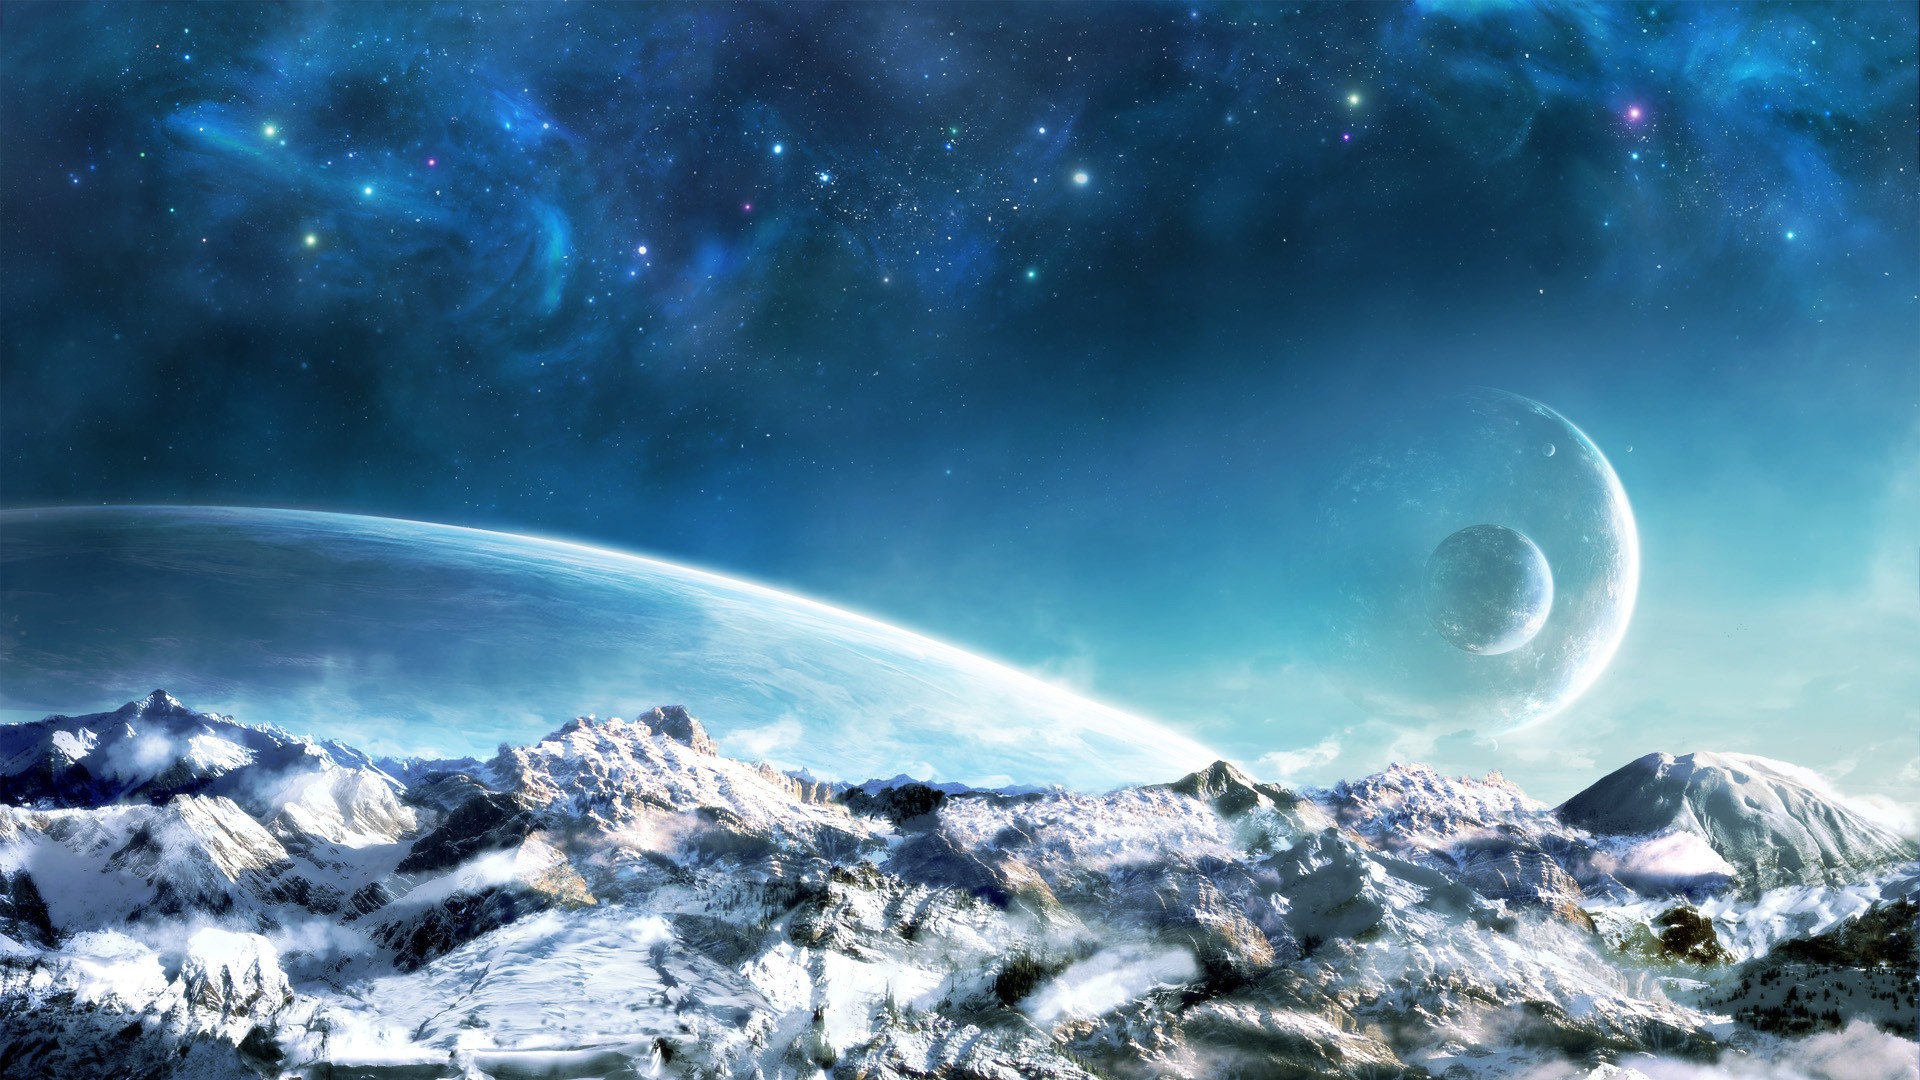 mountains, Landscapes, Snow, Outer, Space, Stars, Planets, Rise, Sci fi Wallpaper